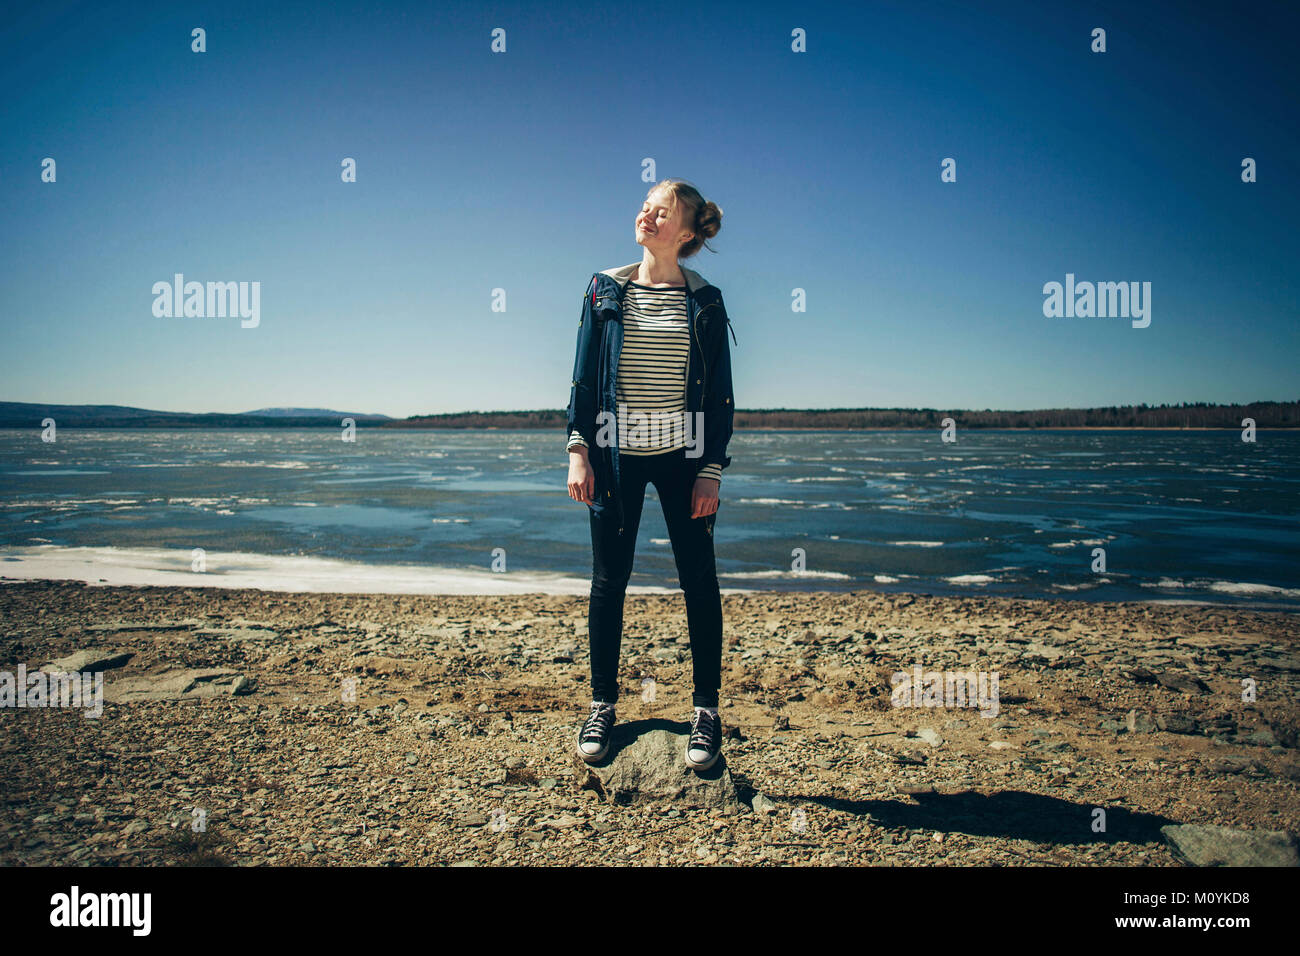 Portrait of teenage Girl standing on sunny beach Banque D'Images